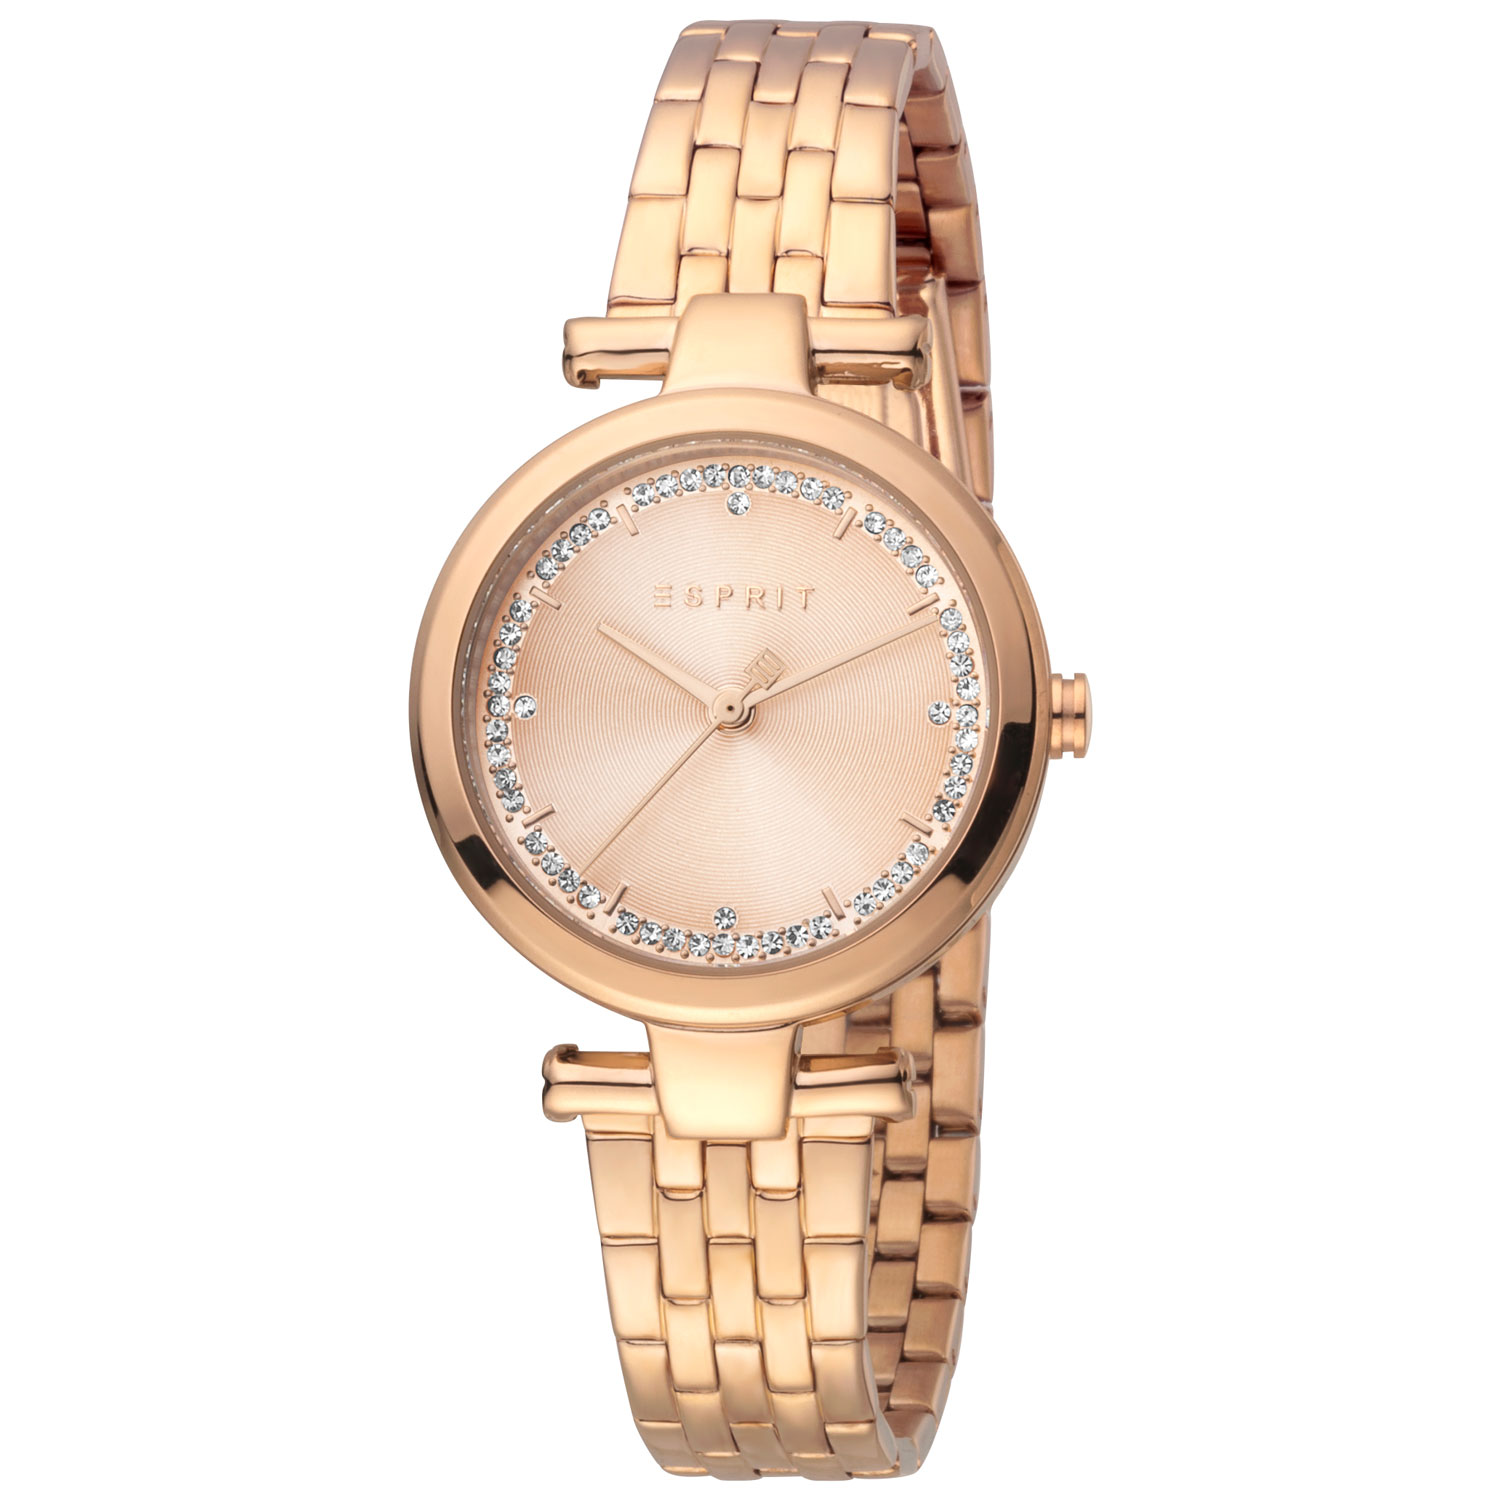 FELIX Women Copper-Toned Stainless Steel Bracelet Style Analogue Watch  F90160LMCO Price in India, Full Specifications & Offers | DTashion.com